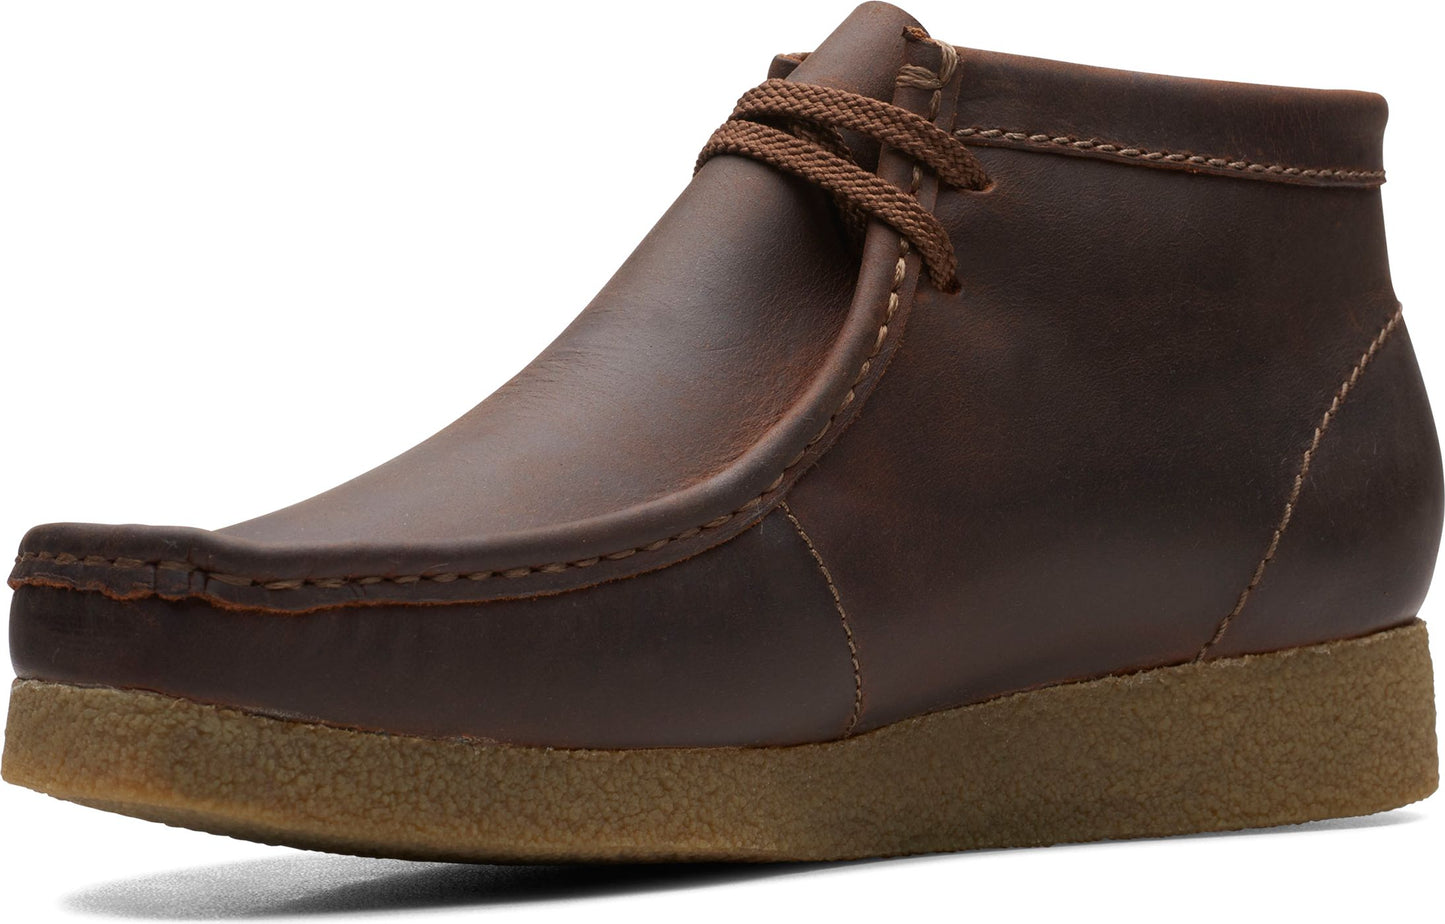 Clarks Boots Shacre Boot Beeswax